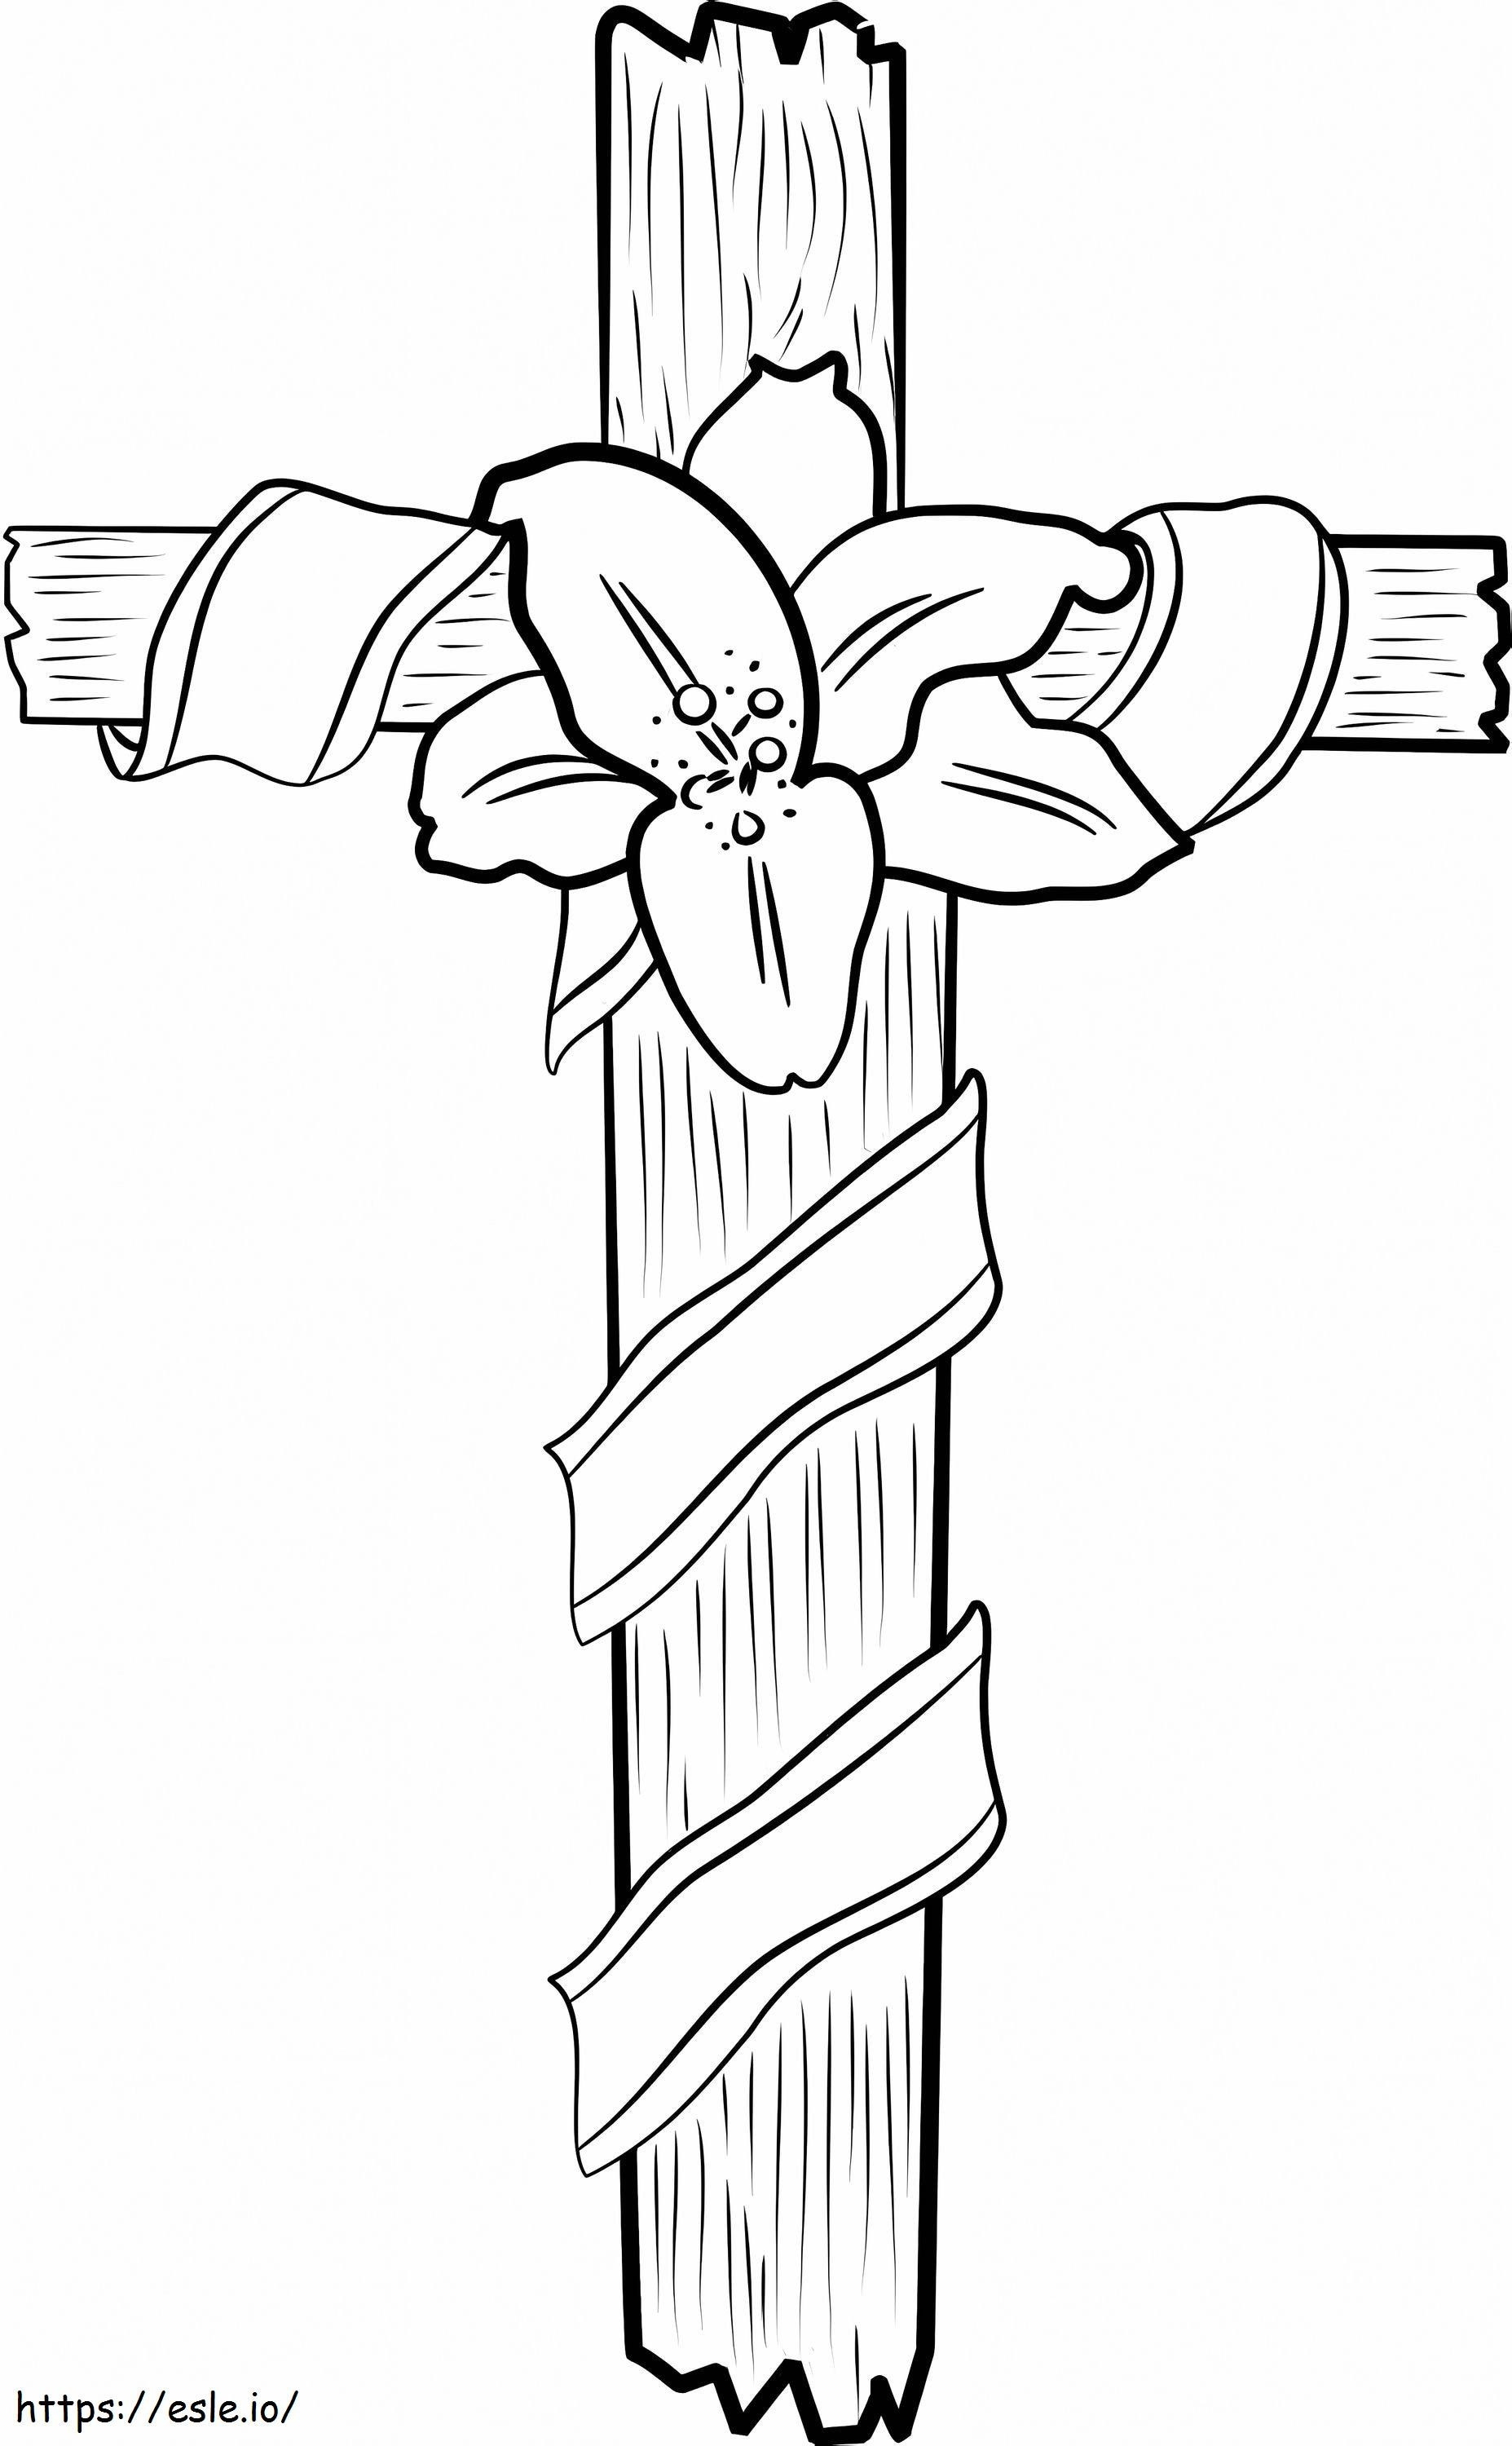 Wooden Cross With Flower coloring page